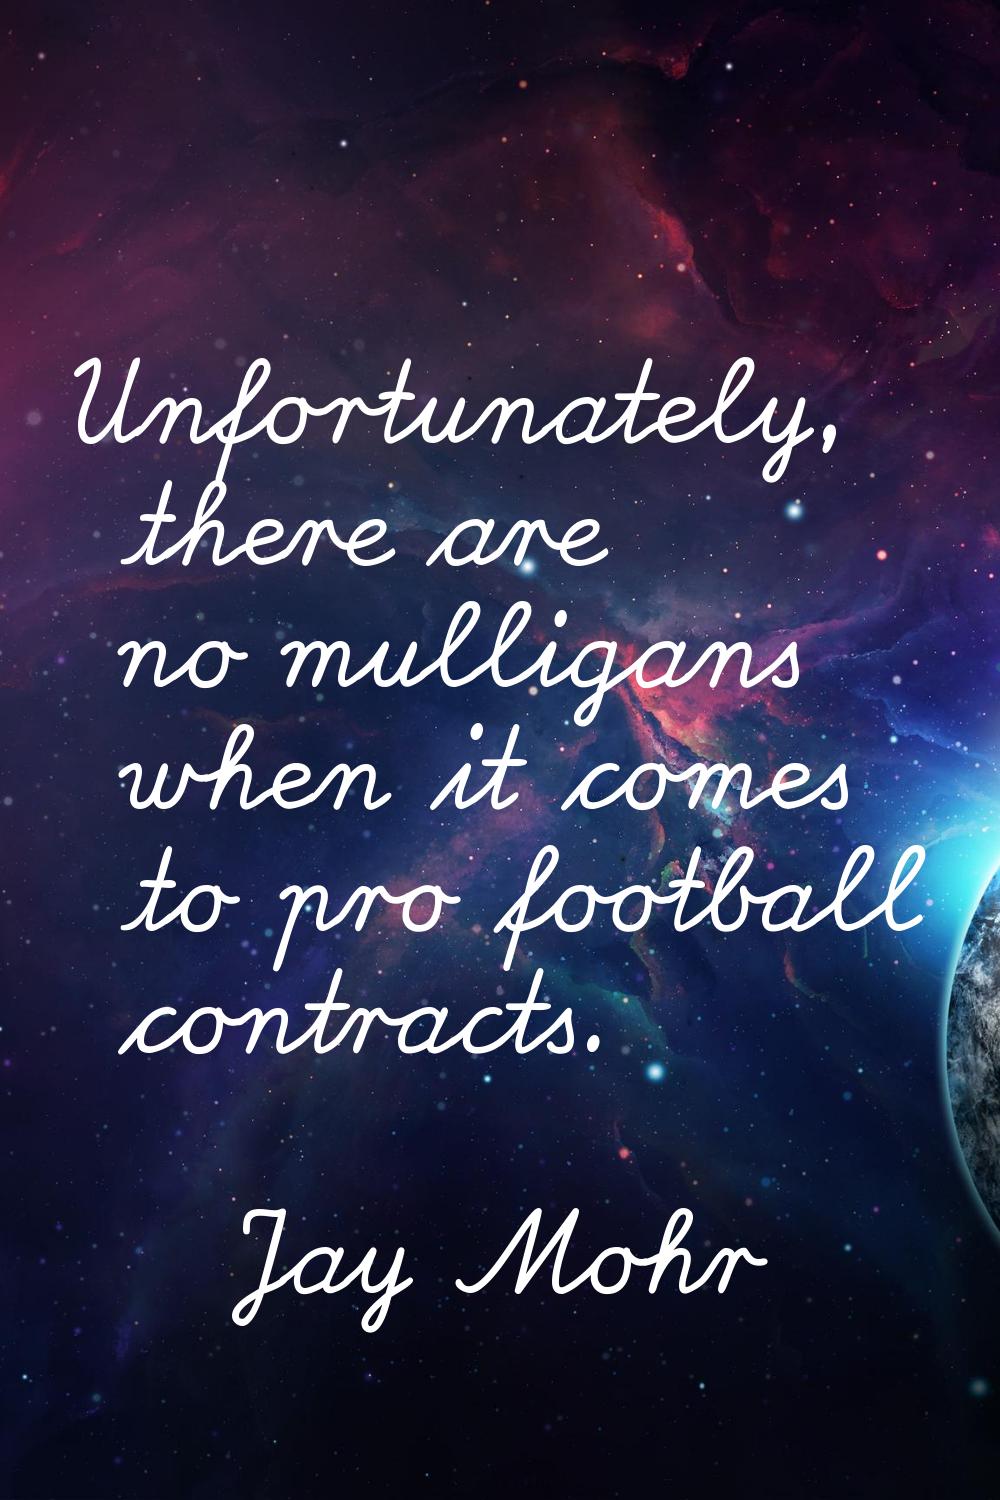 Unfortunately, there are no mulligans when it comes to pro football contracts.